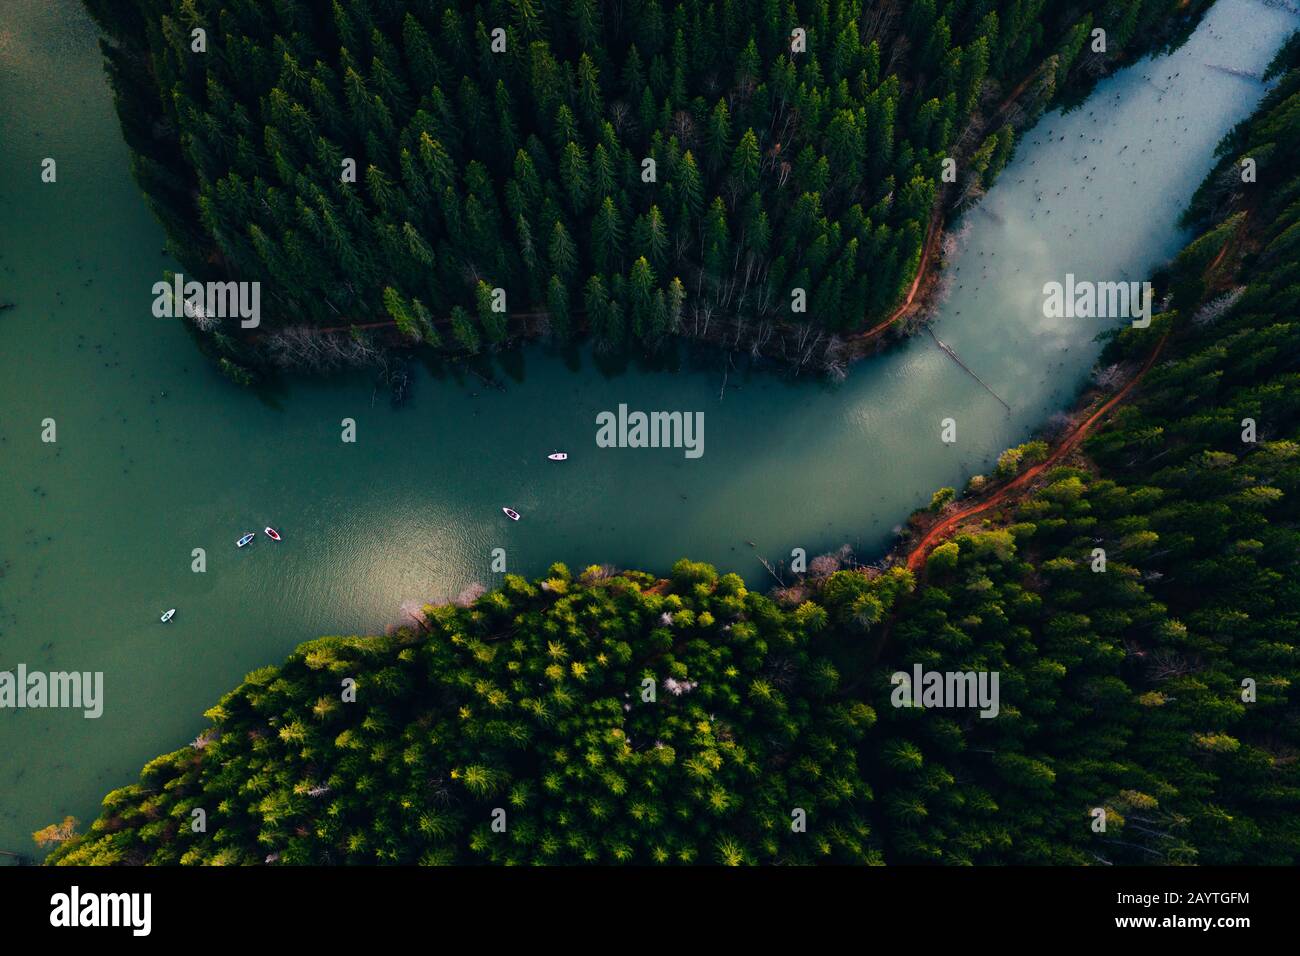 Lake ina pine tree forest with small boats seen from a drone Stock Photo